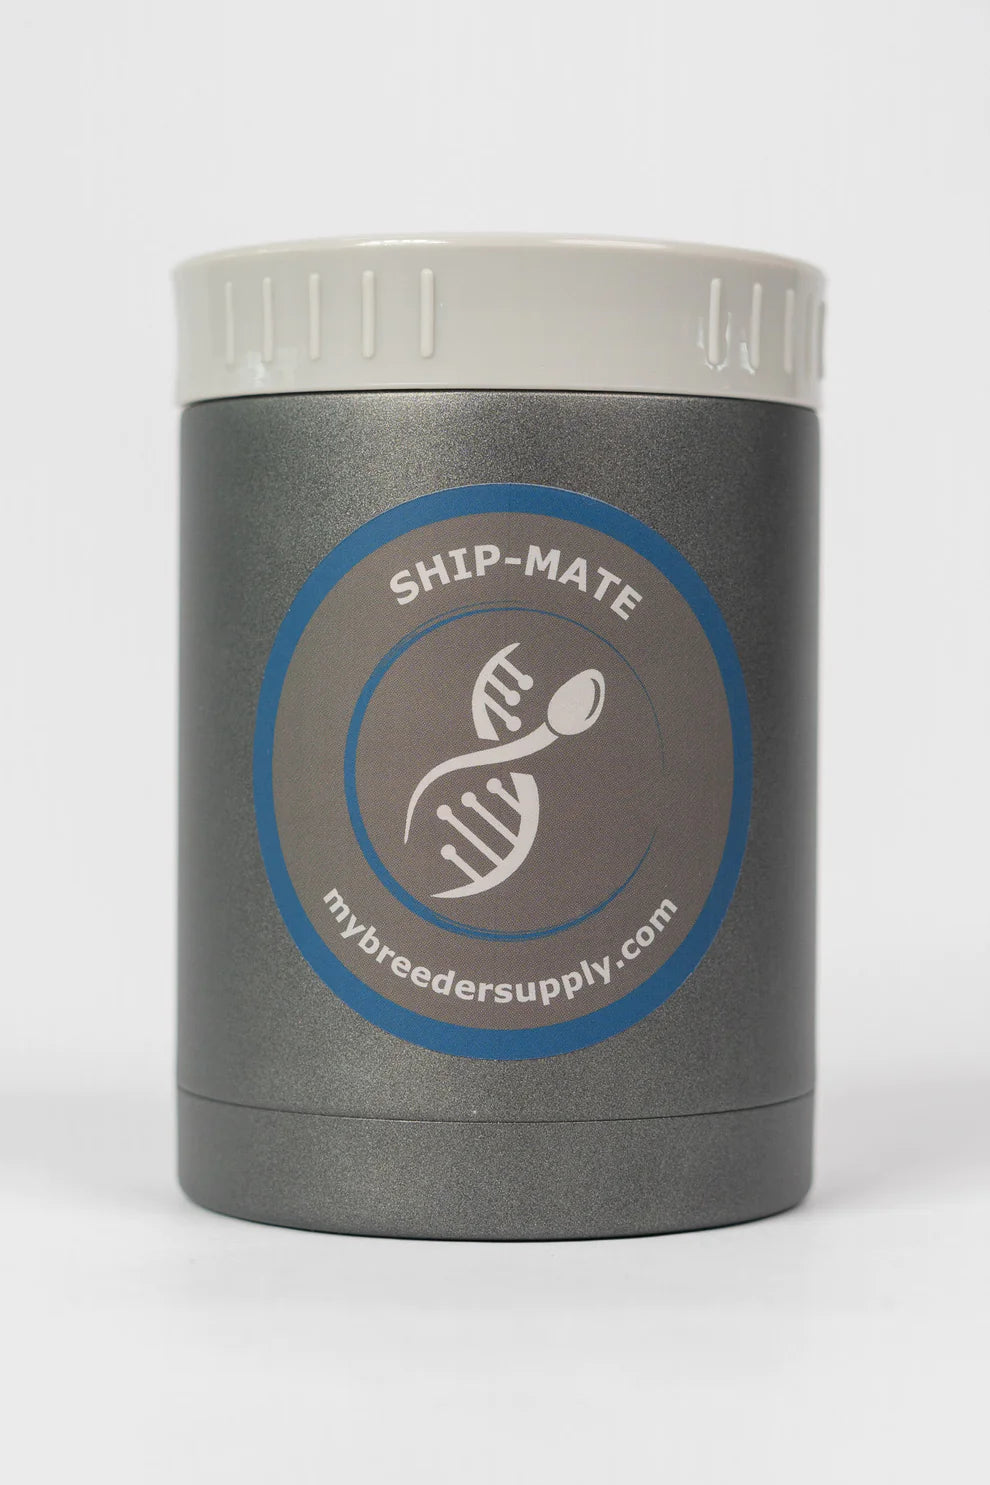 Shipmate: The Ultimate Sperm Shipping Kit for Hassle-Free Delivery